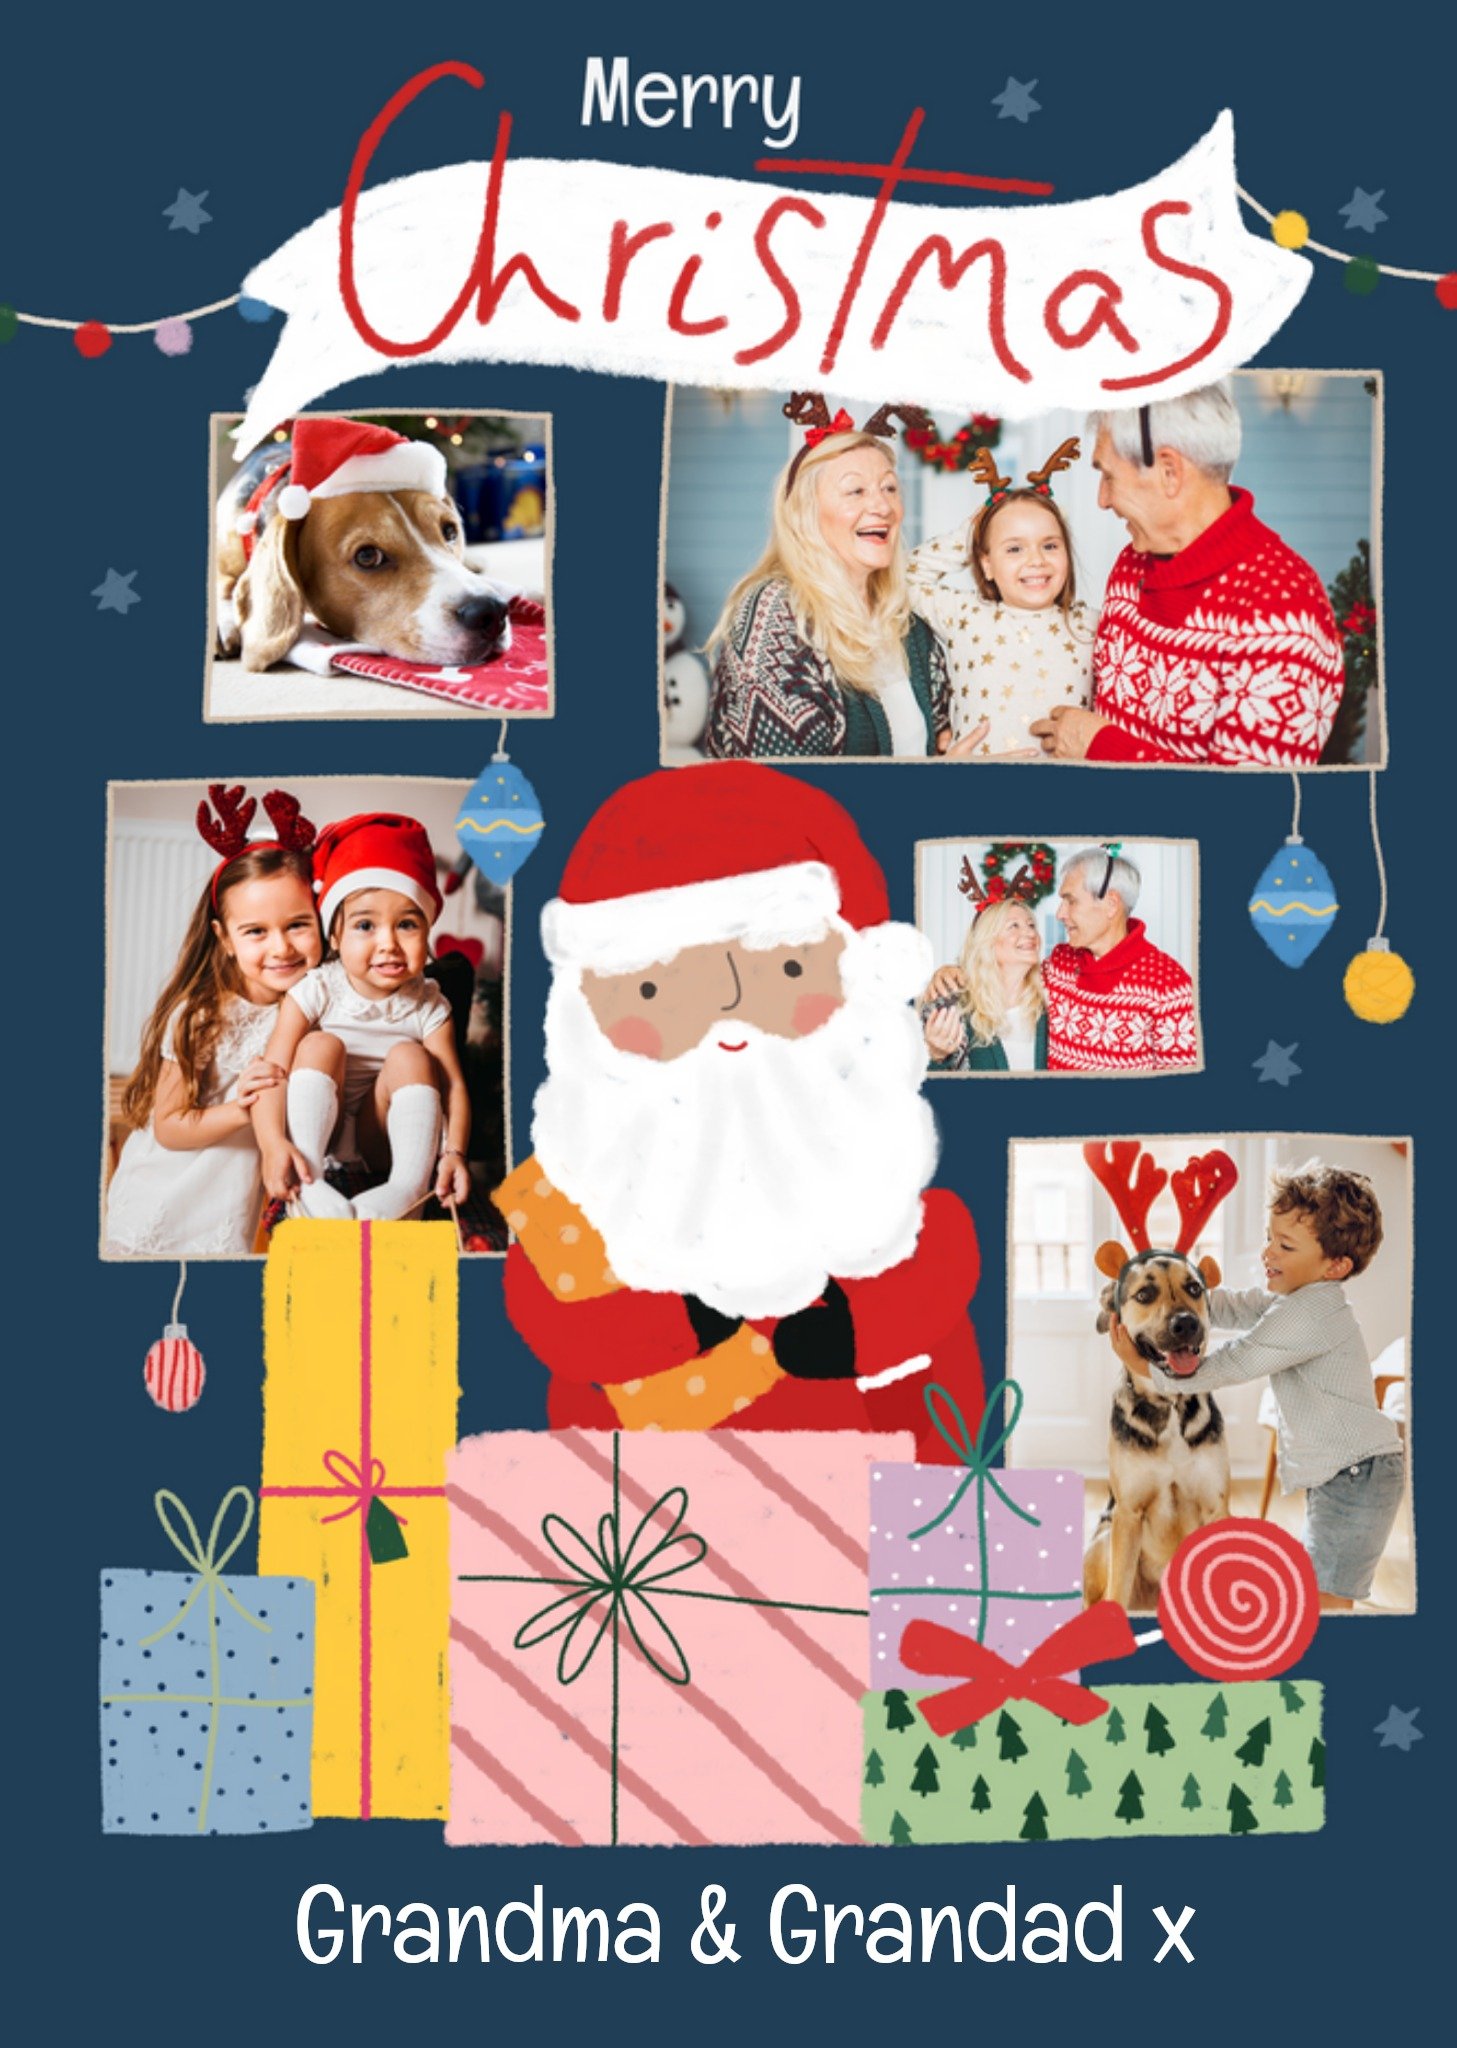 Moonpig Cute Santa Claus With Presents And Baubles Photo Upload Christmas Card Ecard